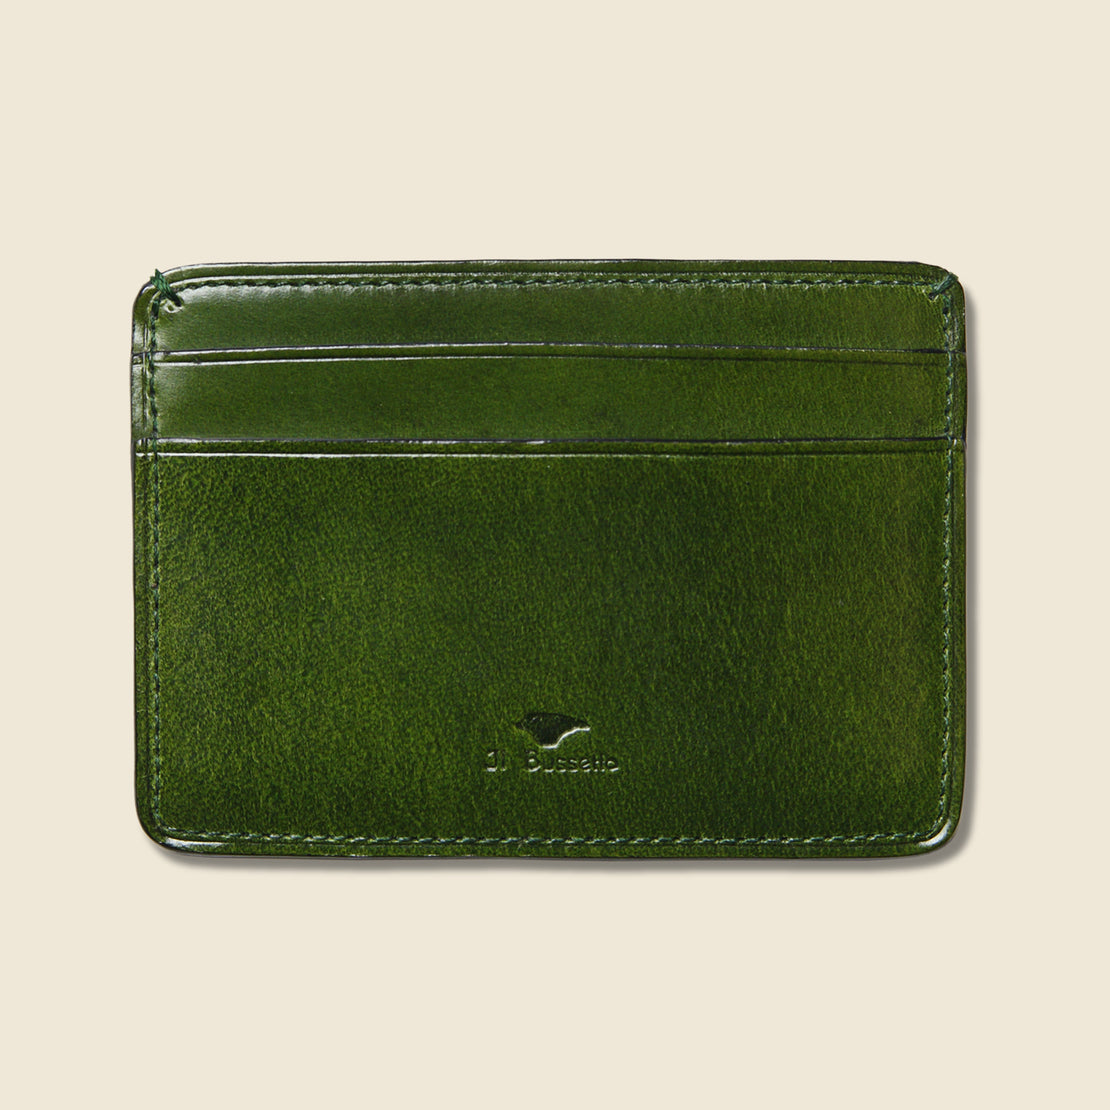 Il Bussetto Credit Card Case - Green